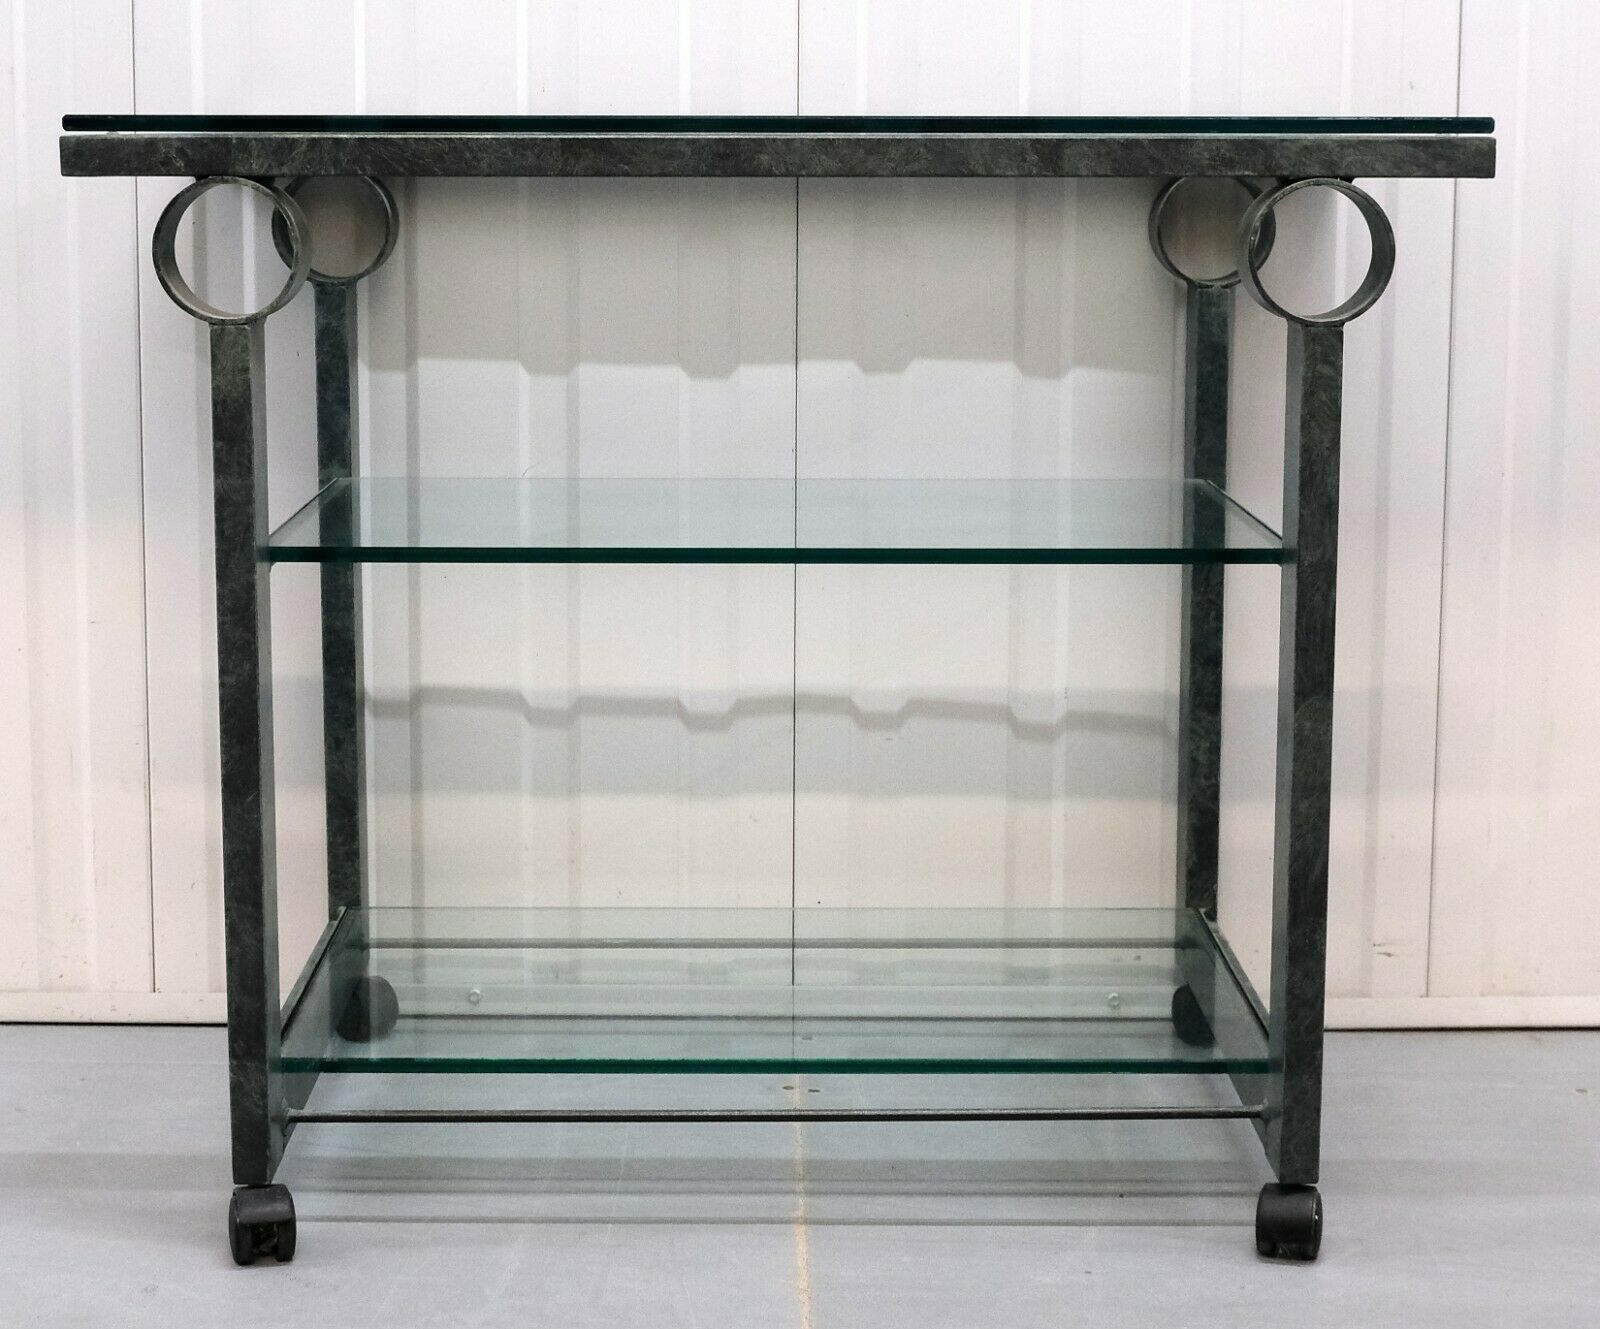 We are delighted to offer for sale this charming art deco glass and iron drinks trolley in very good condition.

The shape of the frame is very sleek and the colour makes a perfect combination for this item. The clear glass is quite thick and